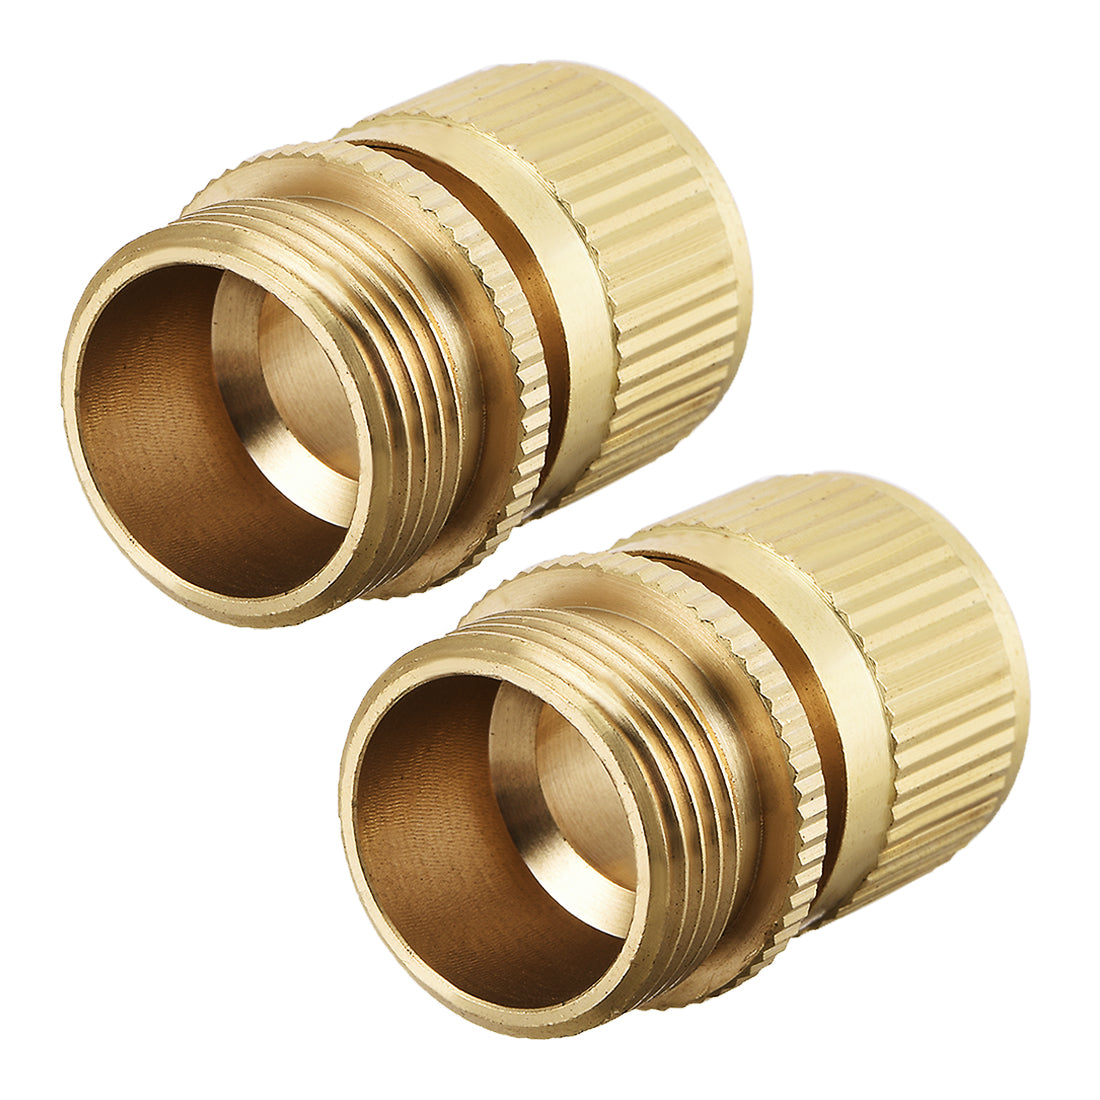 uxcell Uxcell 3/4 G Male Brass Quick Connectors Adapters Garden Hose Fittings 2pcs